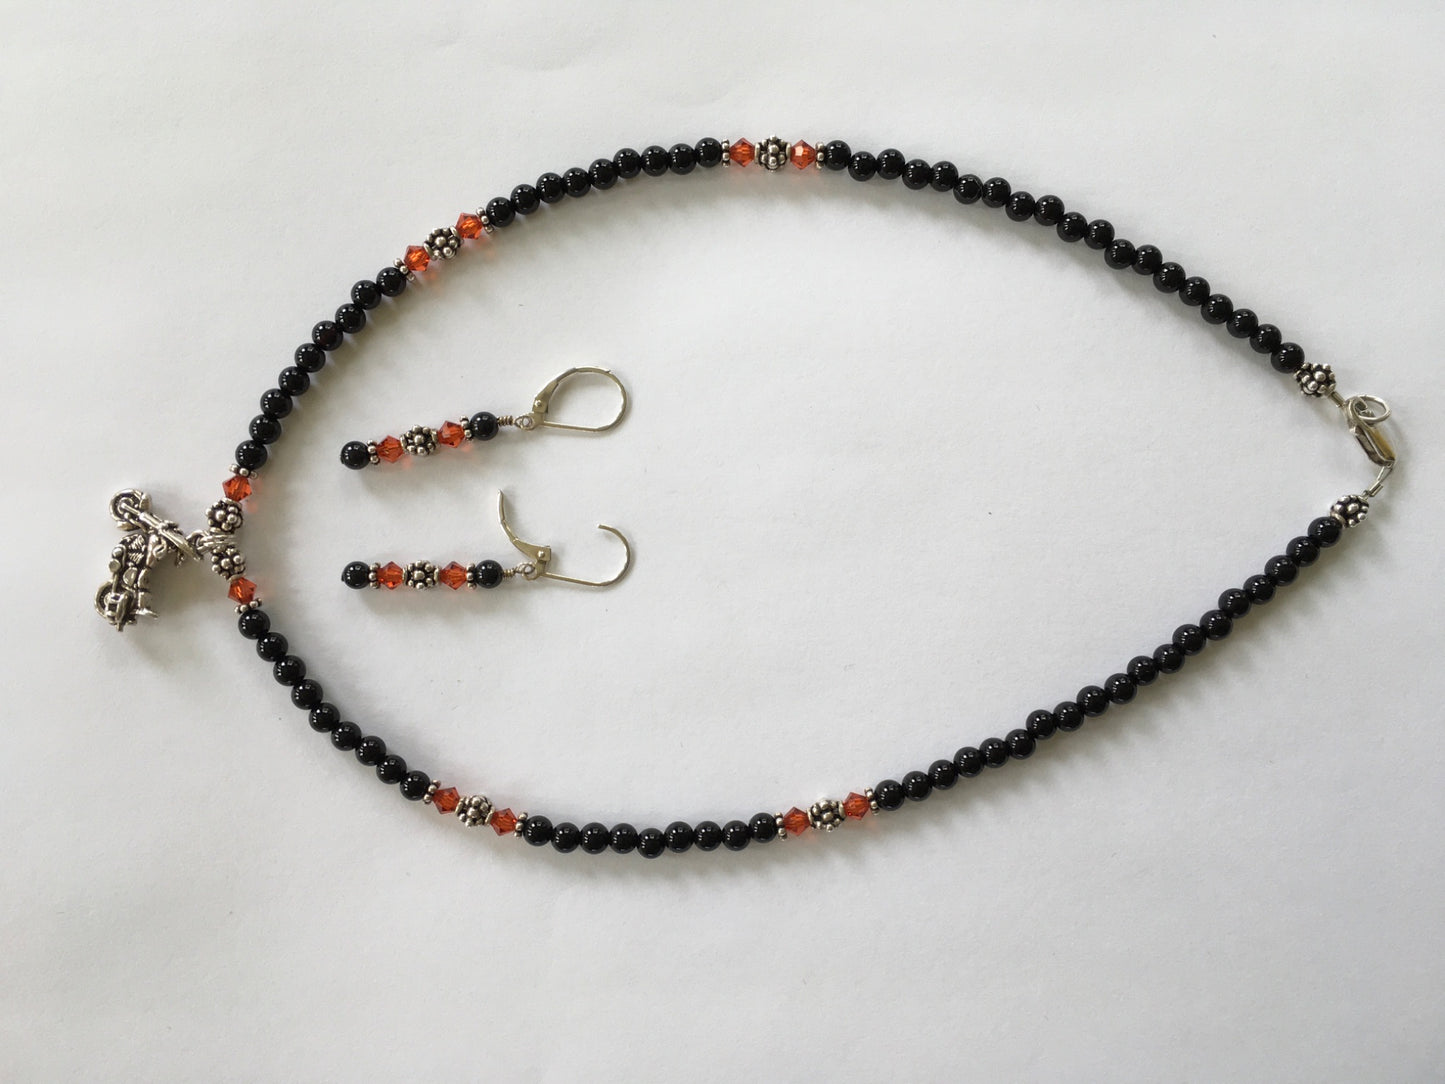 Black Onyx, Orange Swarovski Crystals and Sterling Silver Necklace and Earring Set - 3